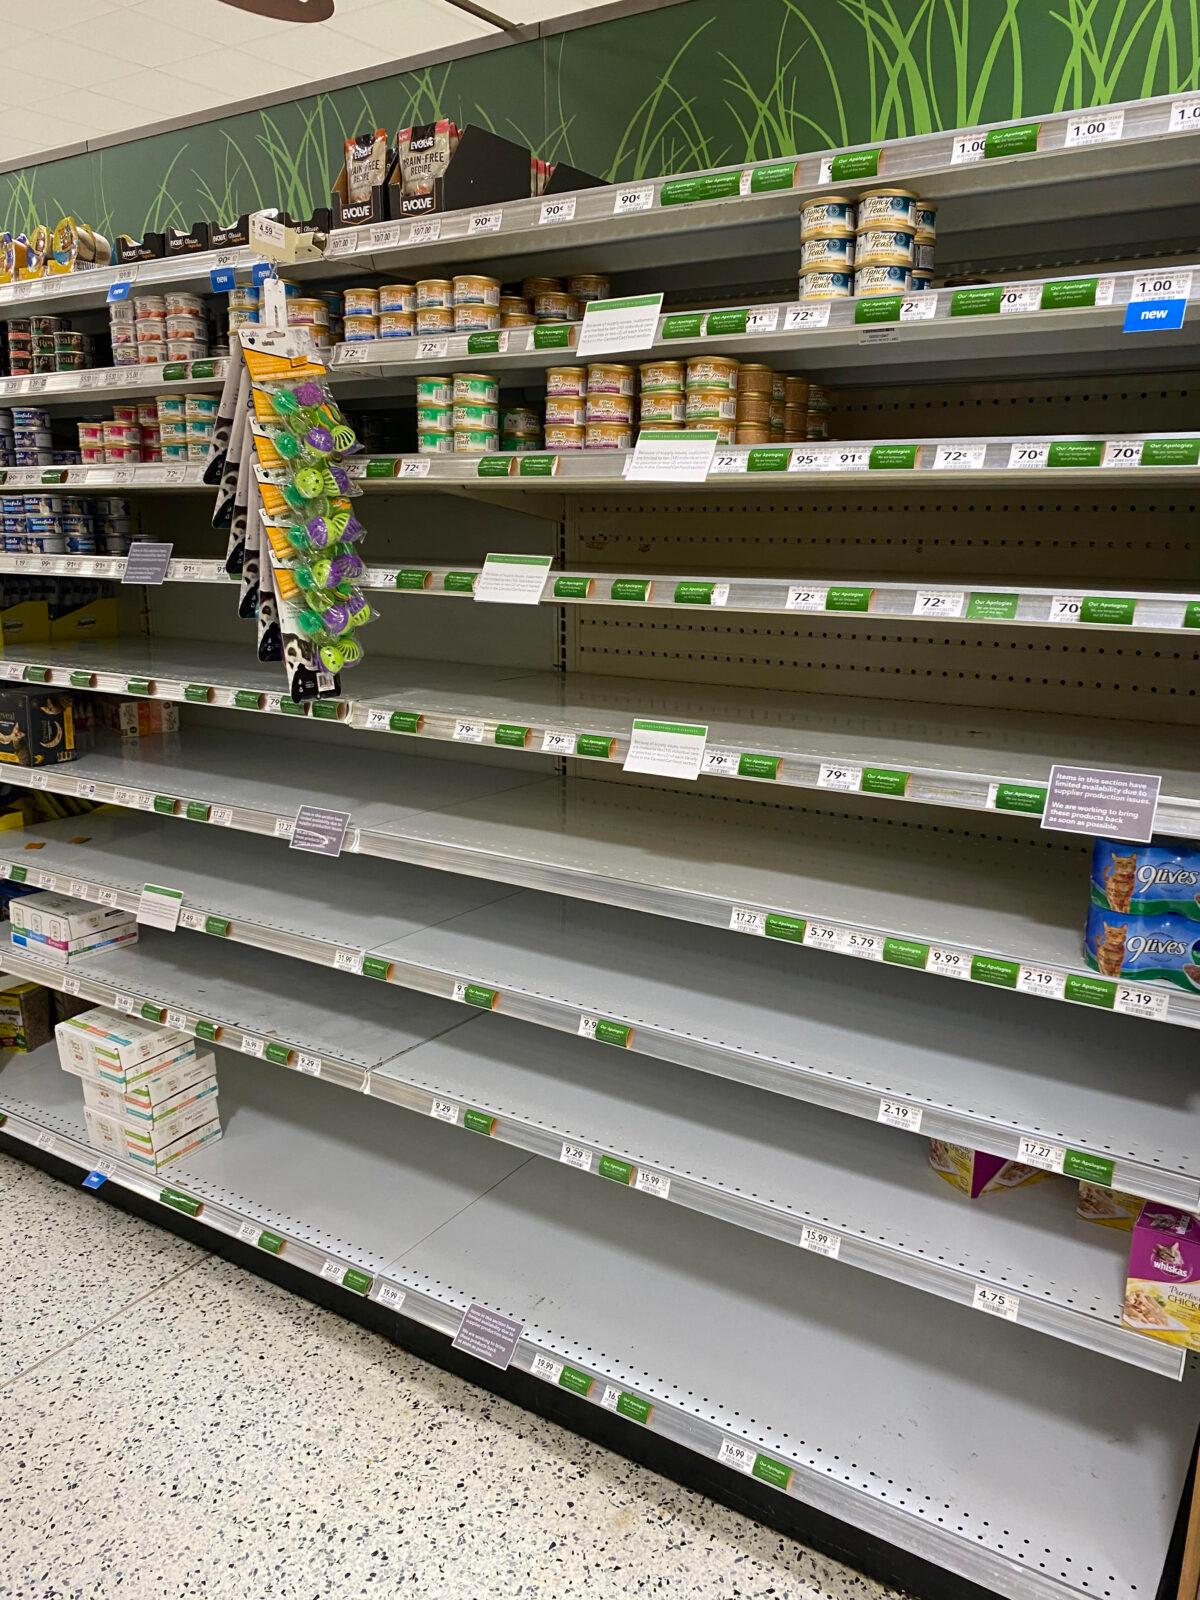 The cat food shelves at a Publix store in Hernando County, Fla., appear empty during the peak of what shelter staff refer to as "cat season" on May 28, 2022. (Patricia Tolson/The Epoch Times)